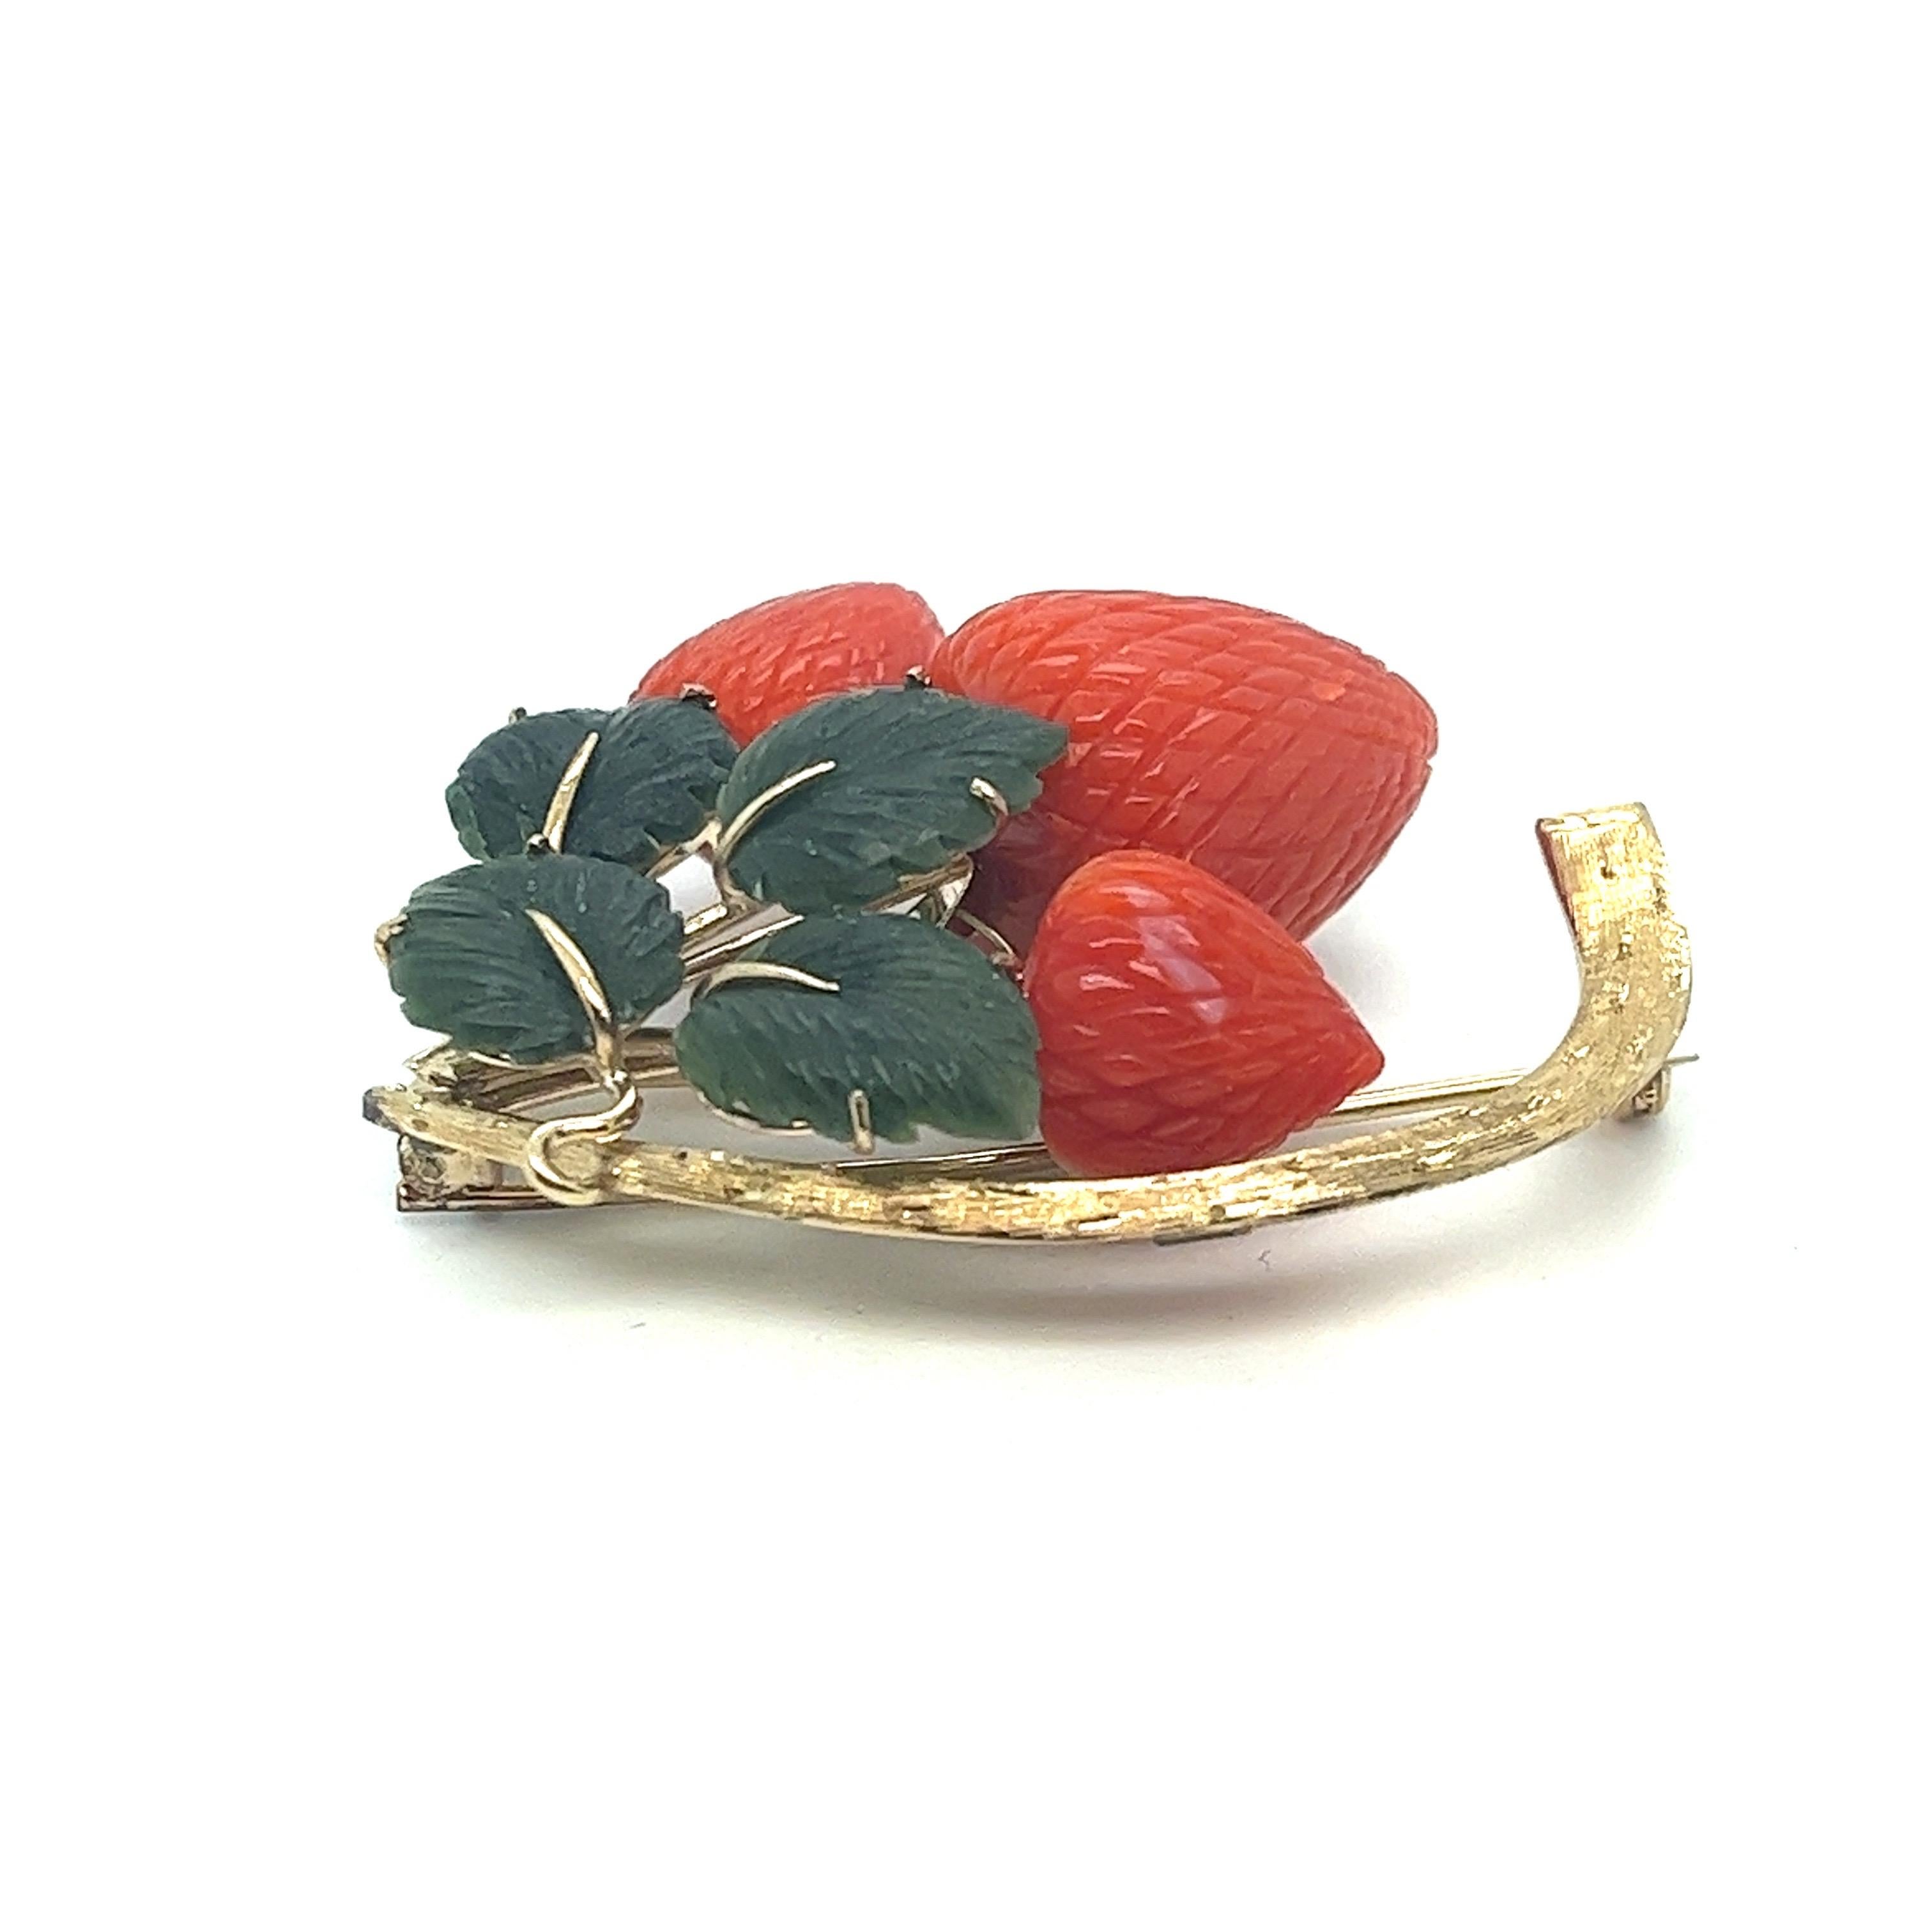 Vintage 1950s Retro Brooch with Natural Coral Strawberries and Jade Nephrite Leaves

Elevate your style with a piece of history that exudes the charm and elegance of the 1950s. This exquisite vintage brooch, crafted in 14kt yellow gold, showcases